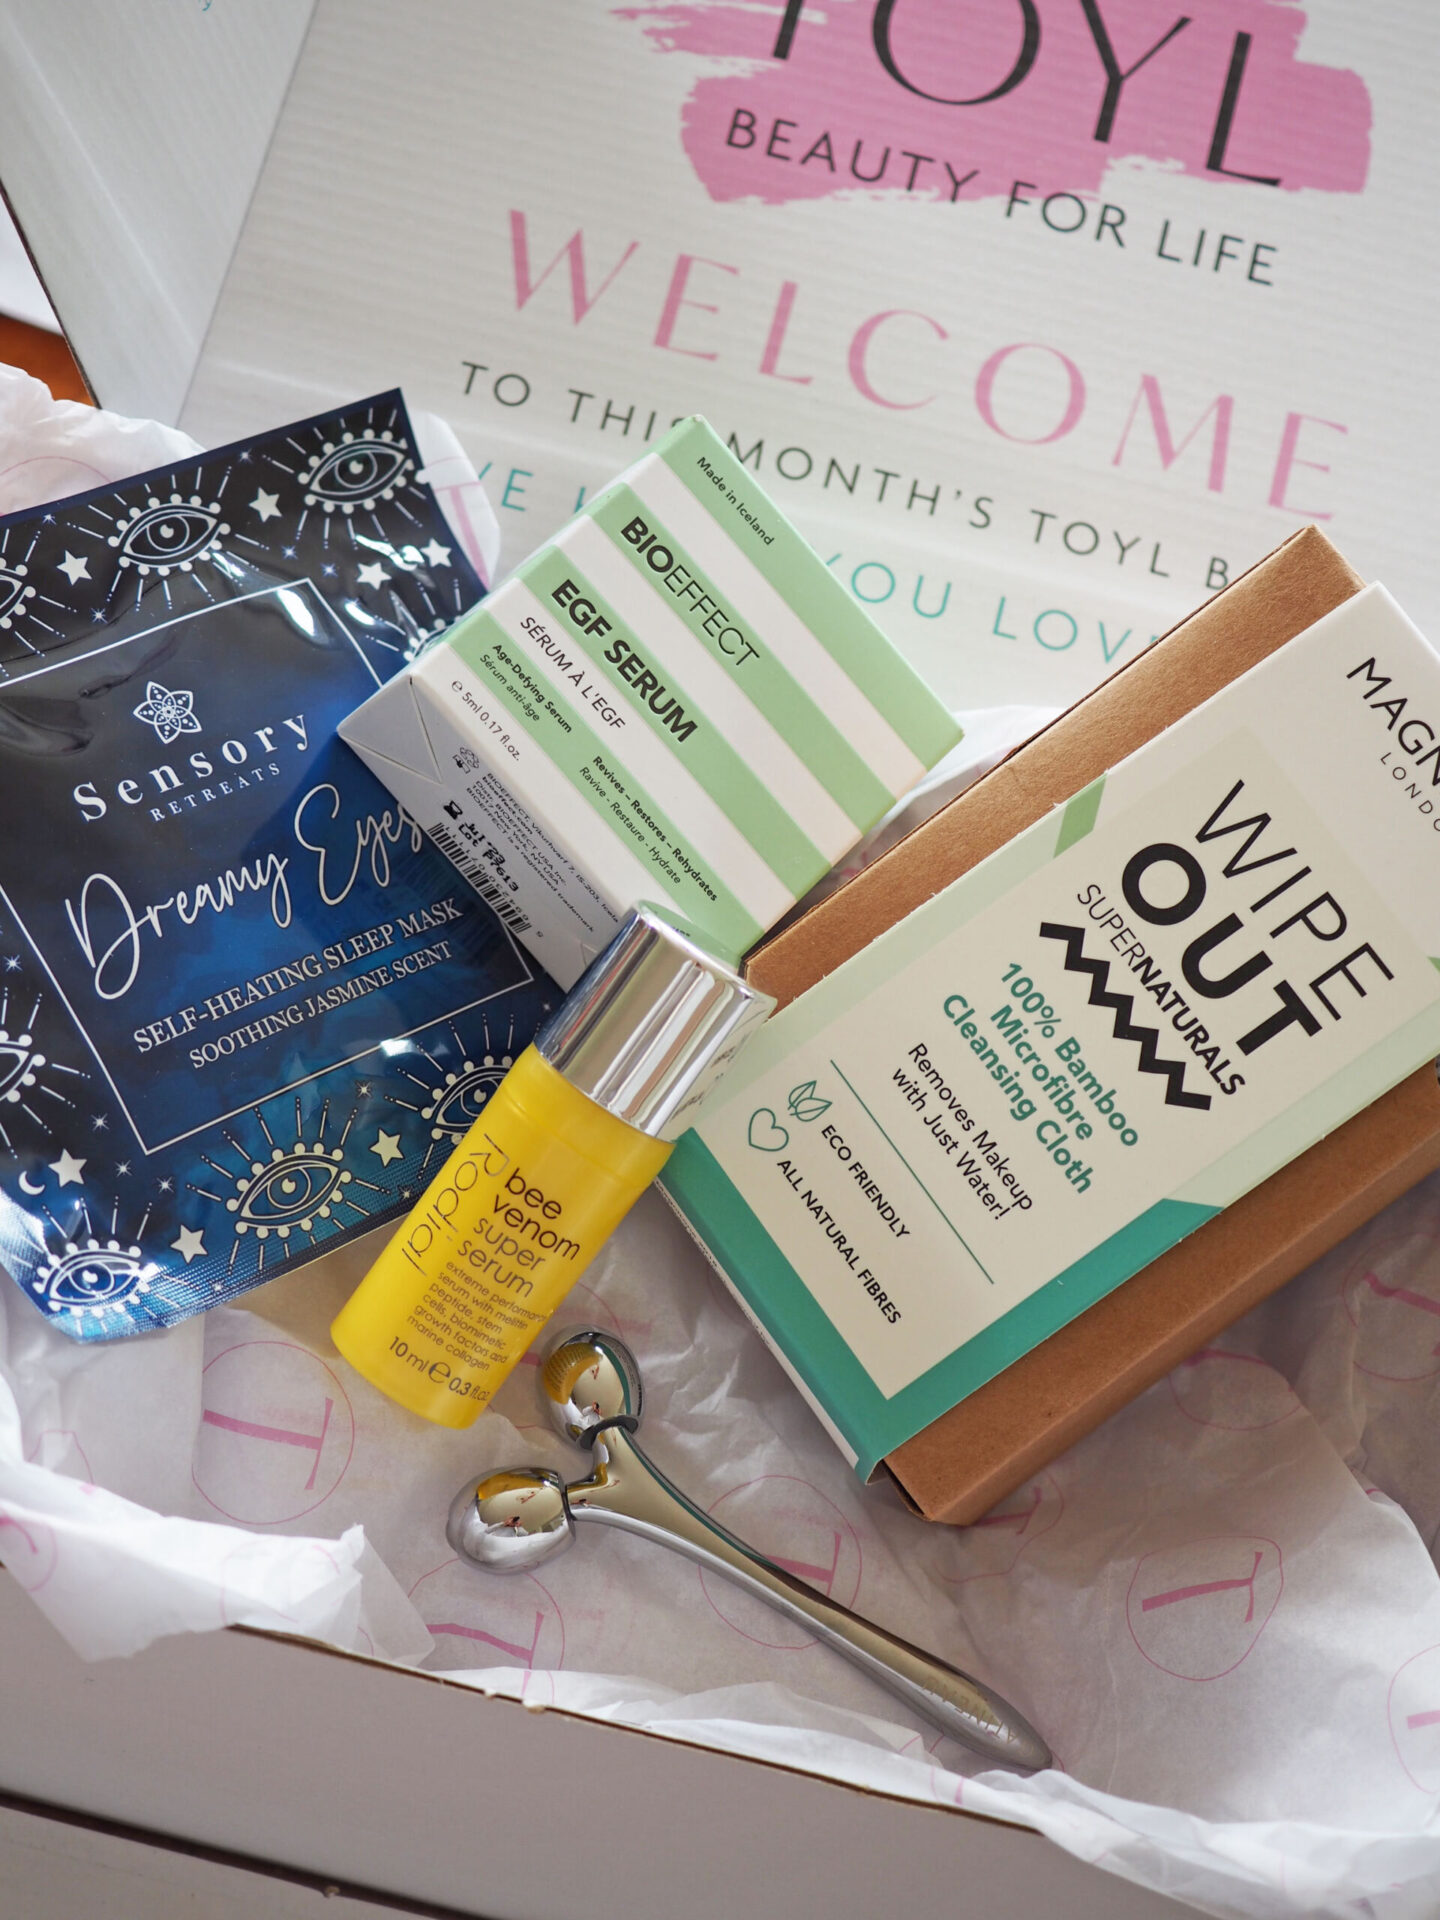 TOYL Time of your life beauty box review